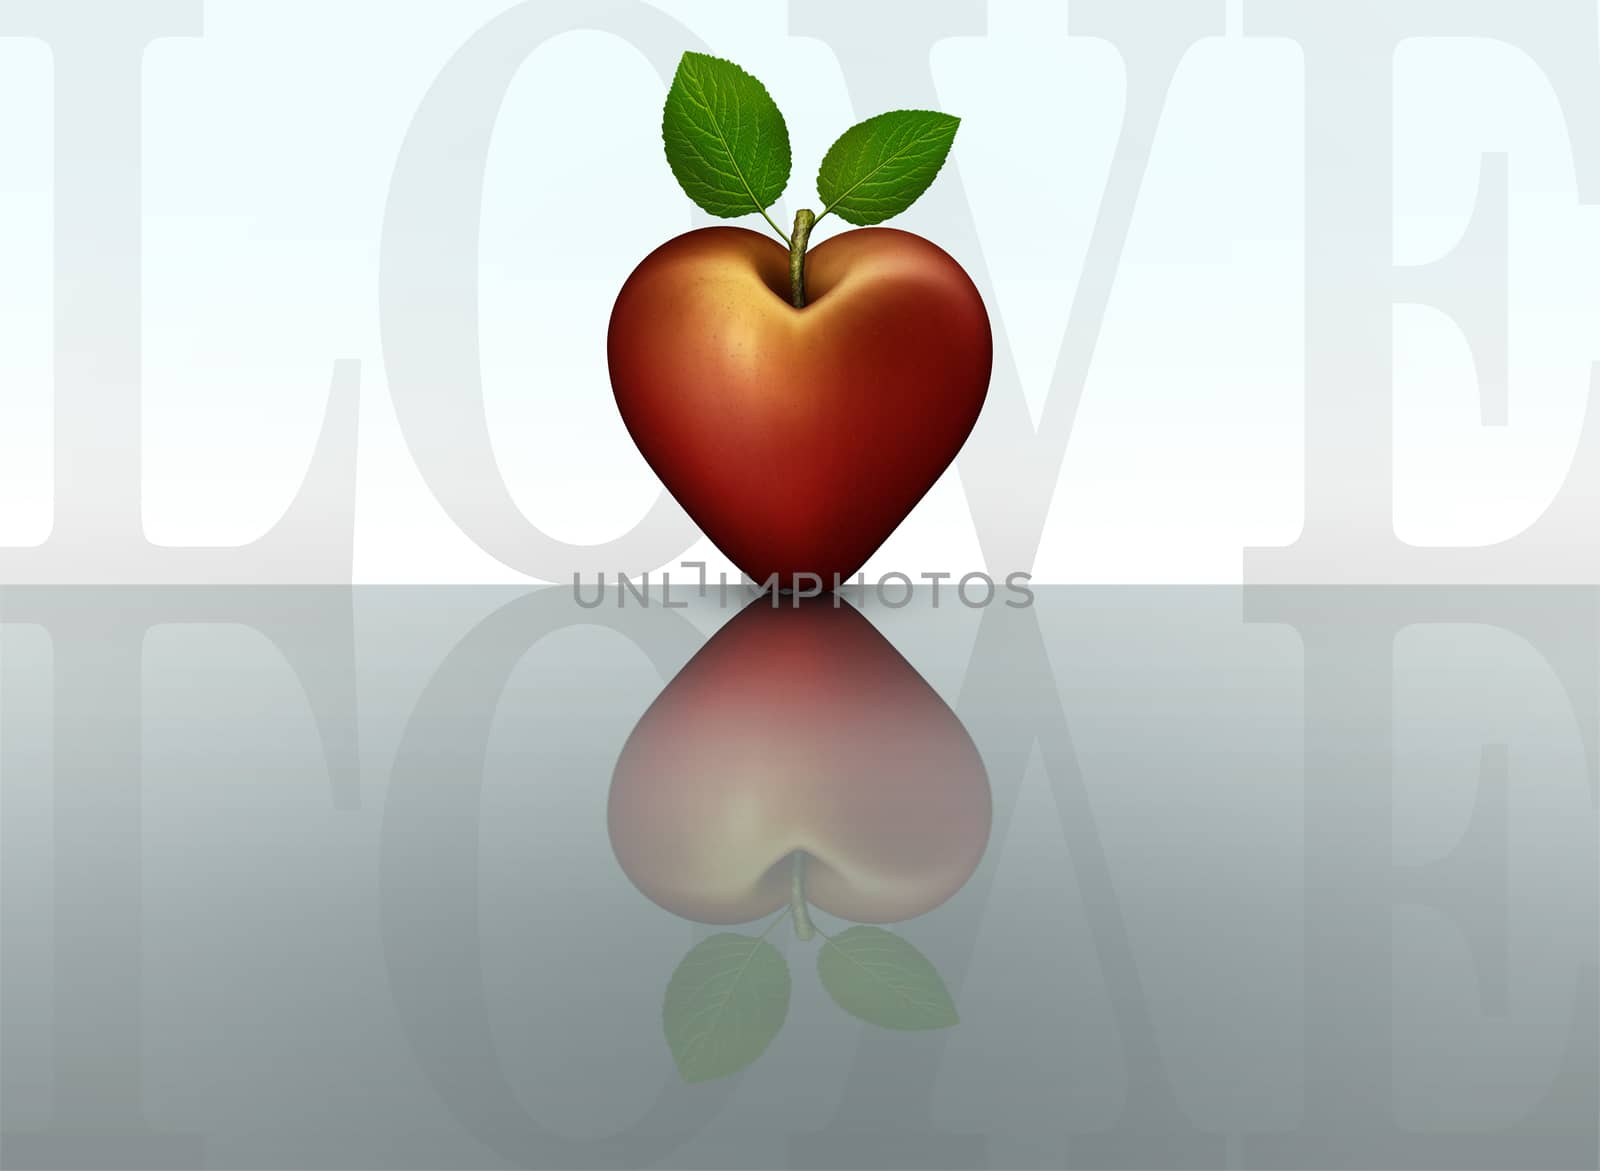 3D illustration of a red heart shaped apple and the word Love mirrored on a reflective table top.